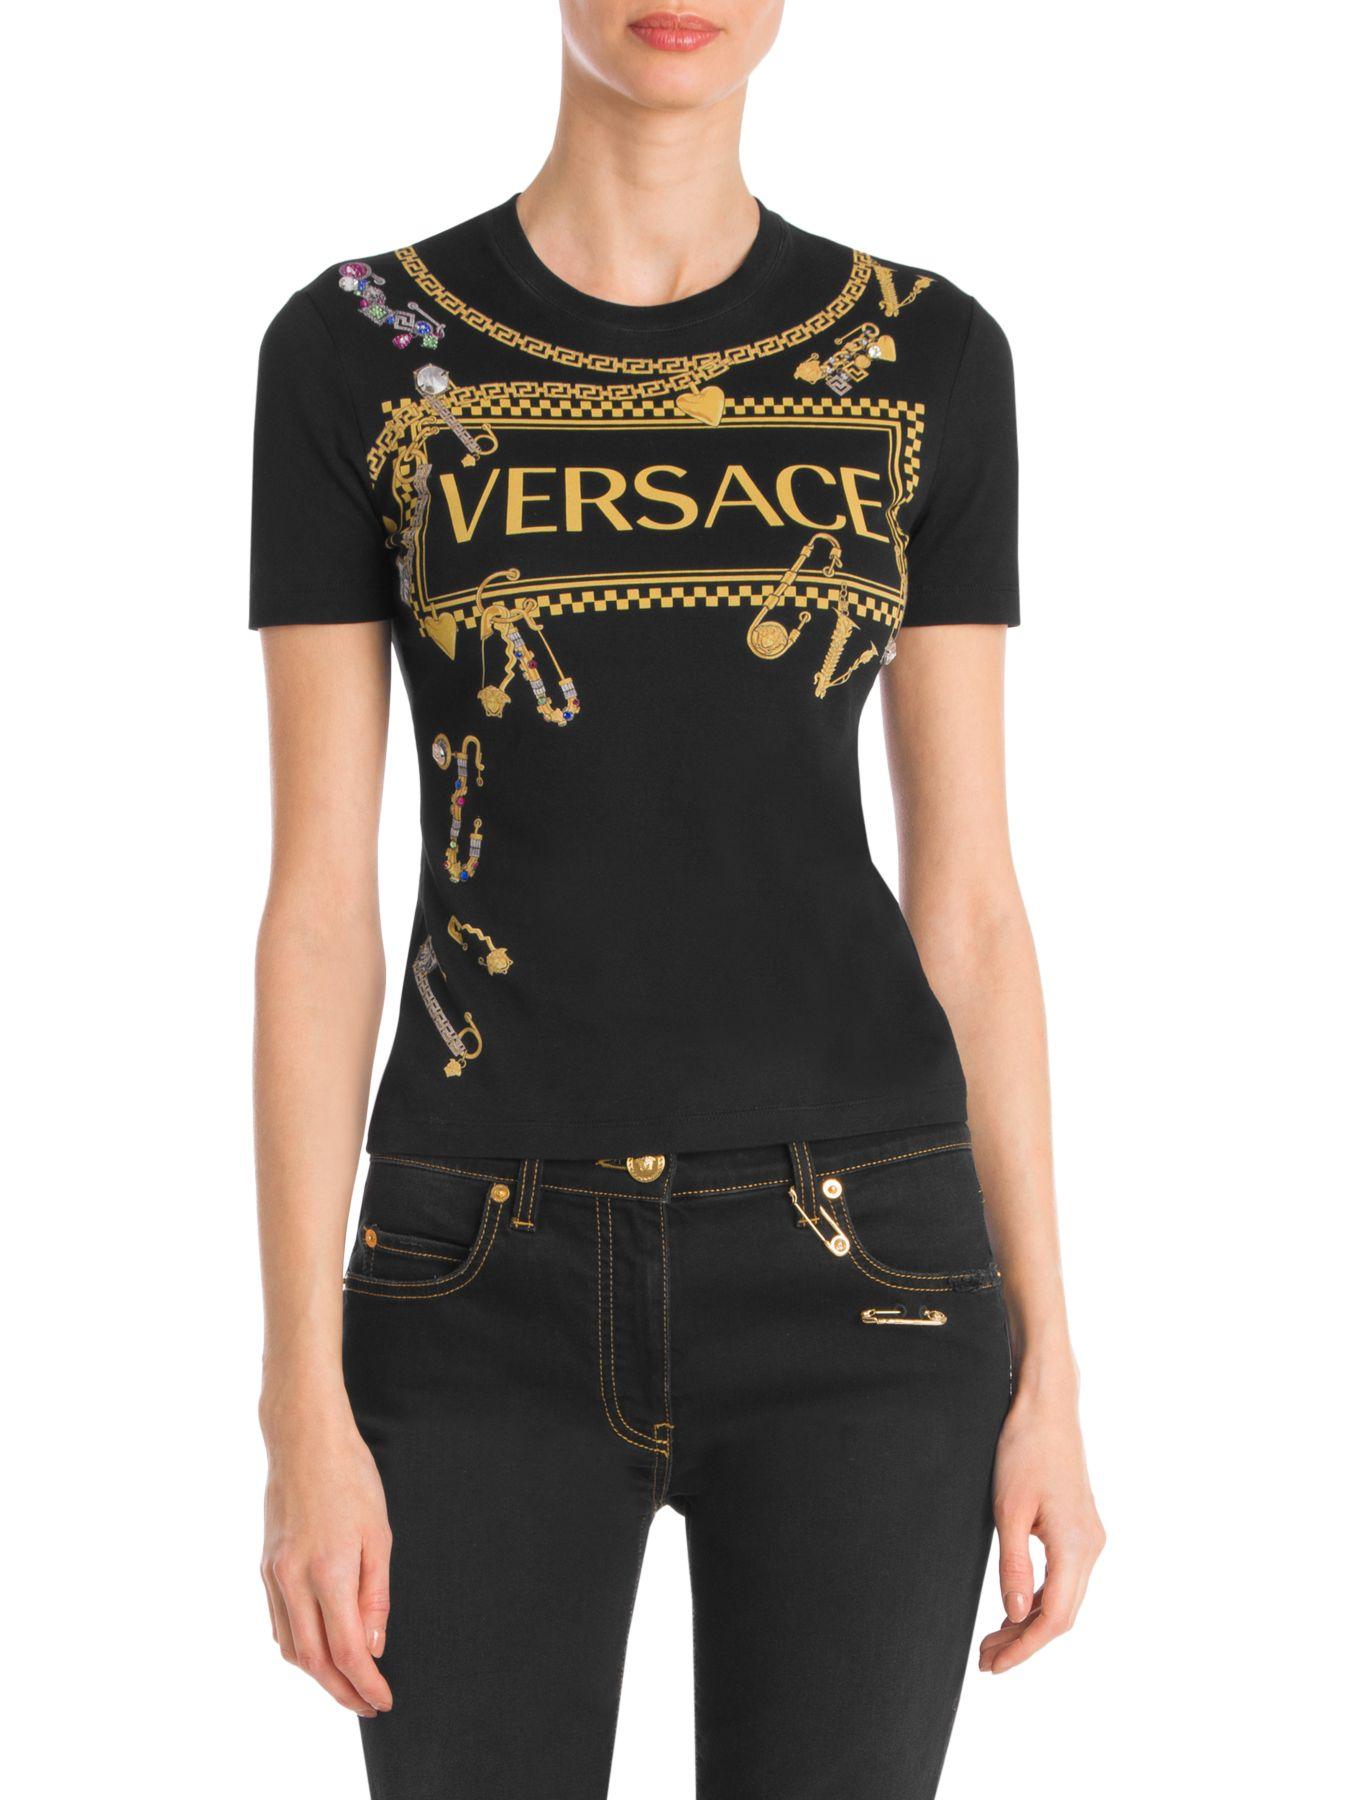 Versace Embellished Cotton Jersey T-shirt in Black - Lyst